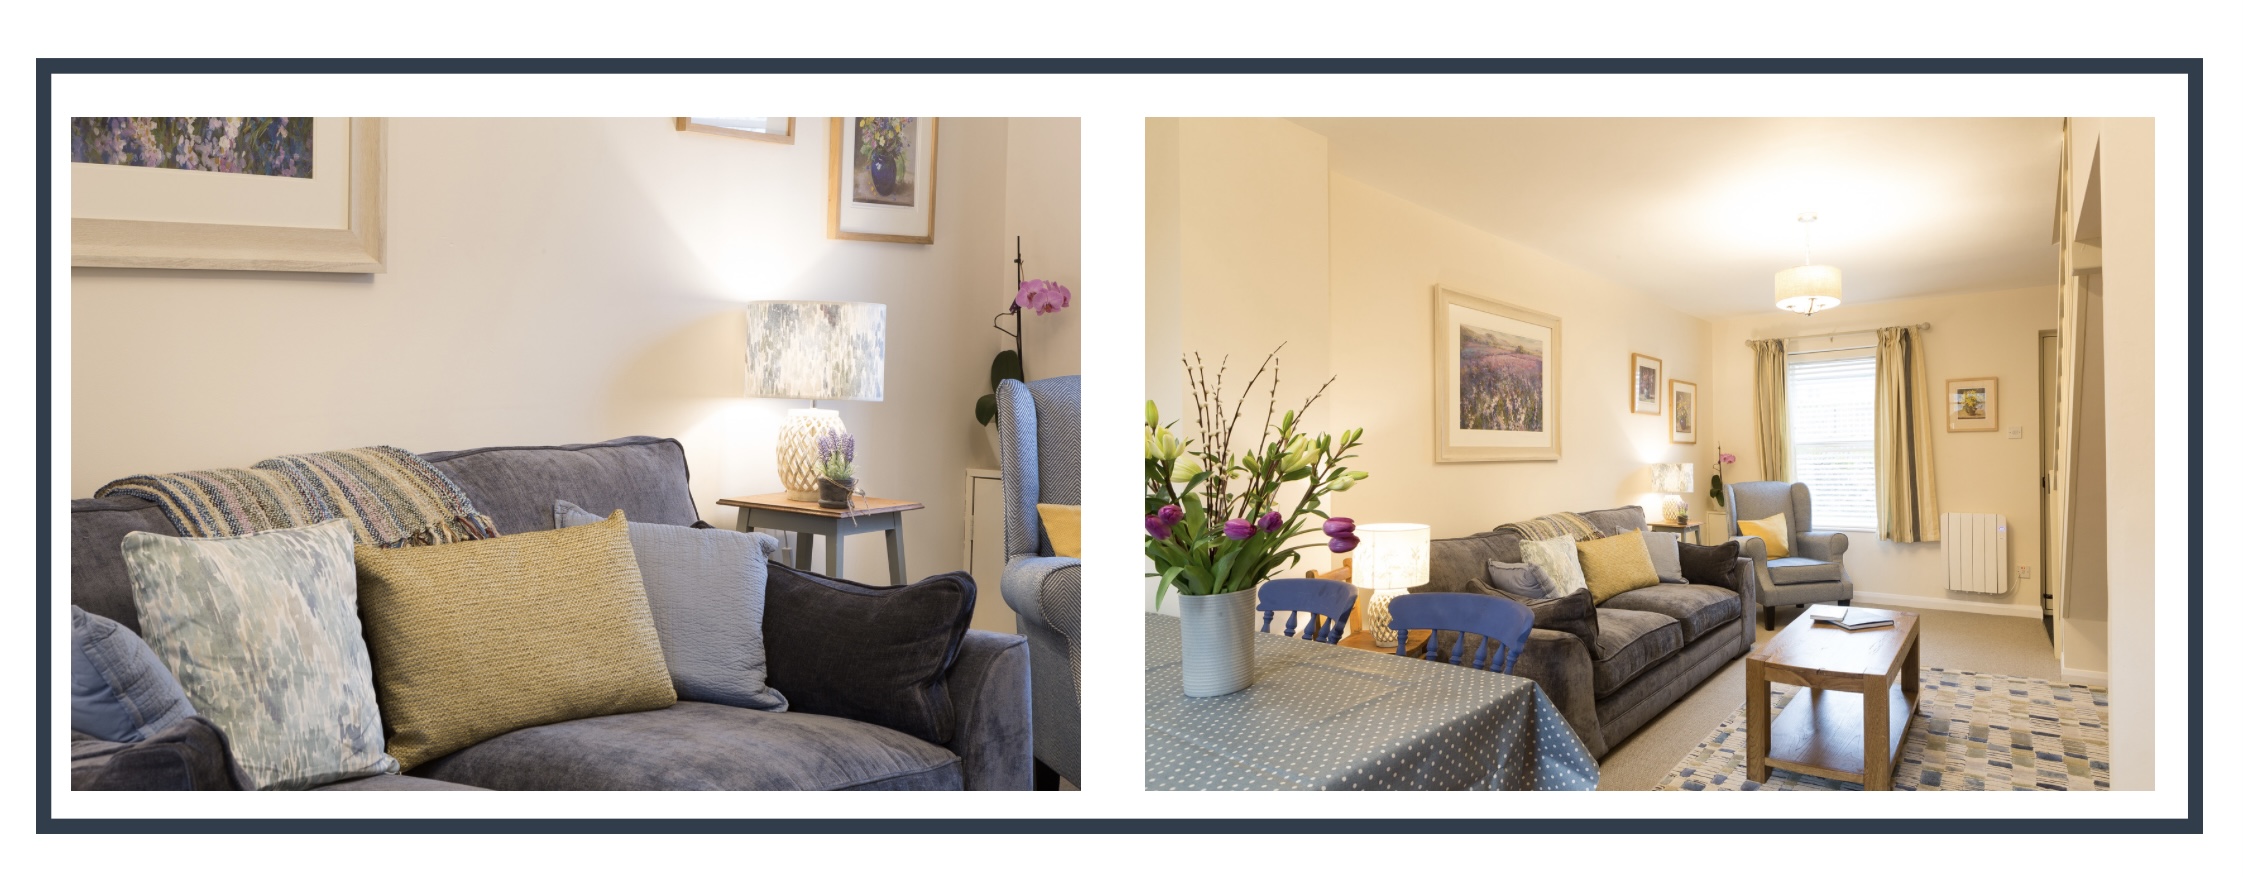 Holiday Cottage Greystoke - Home & More Interiors